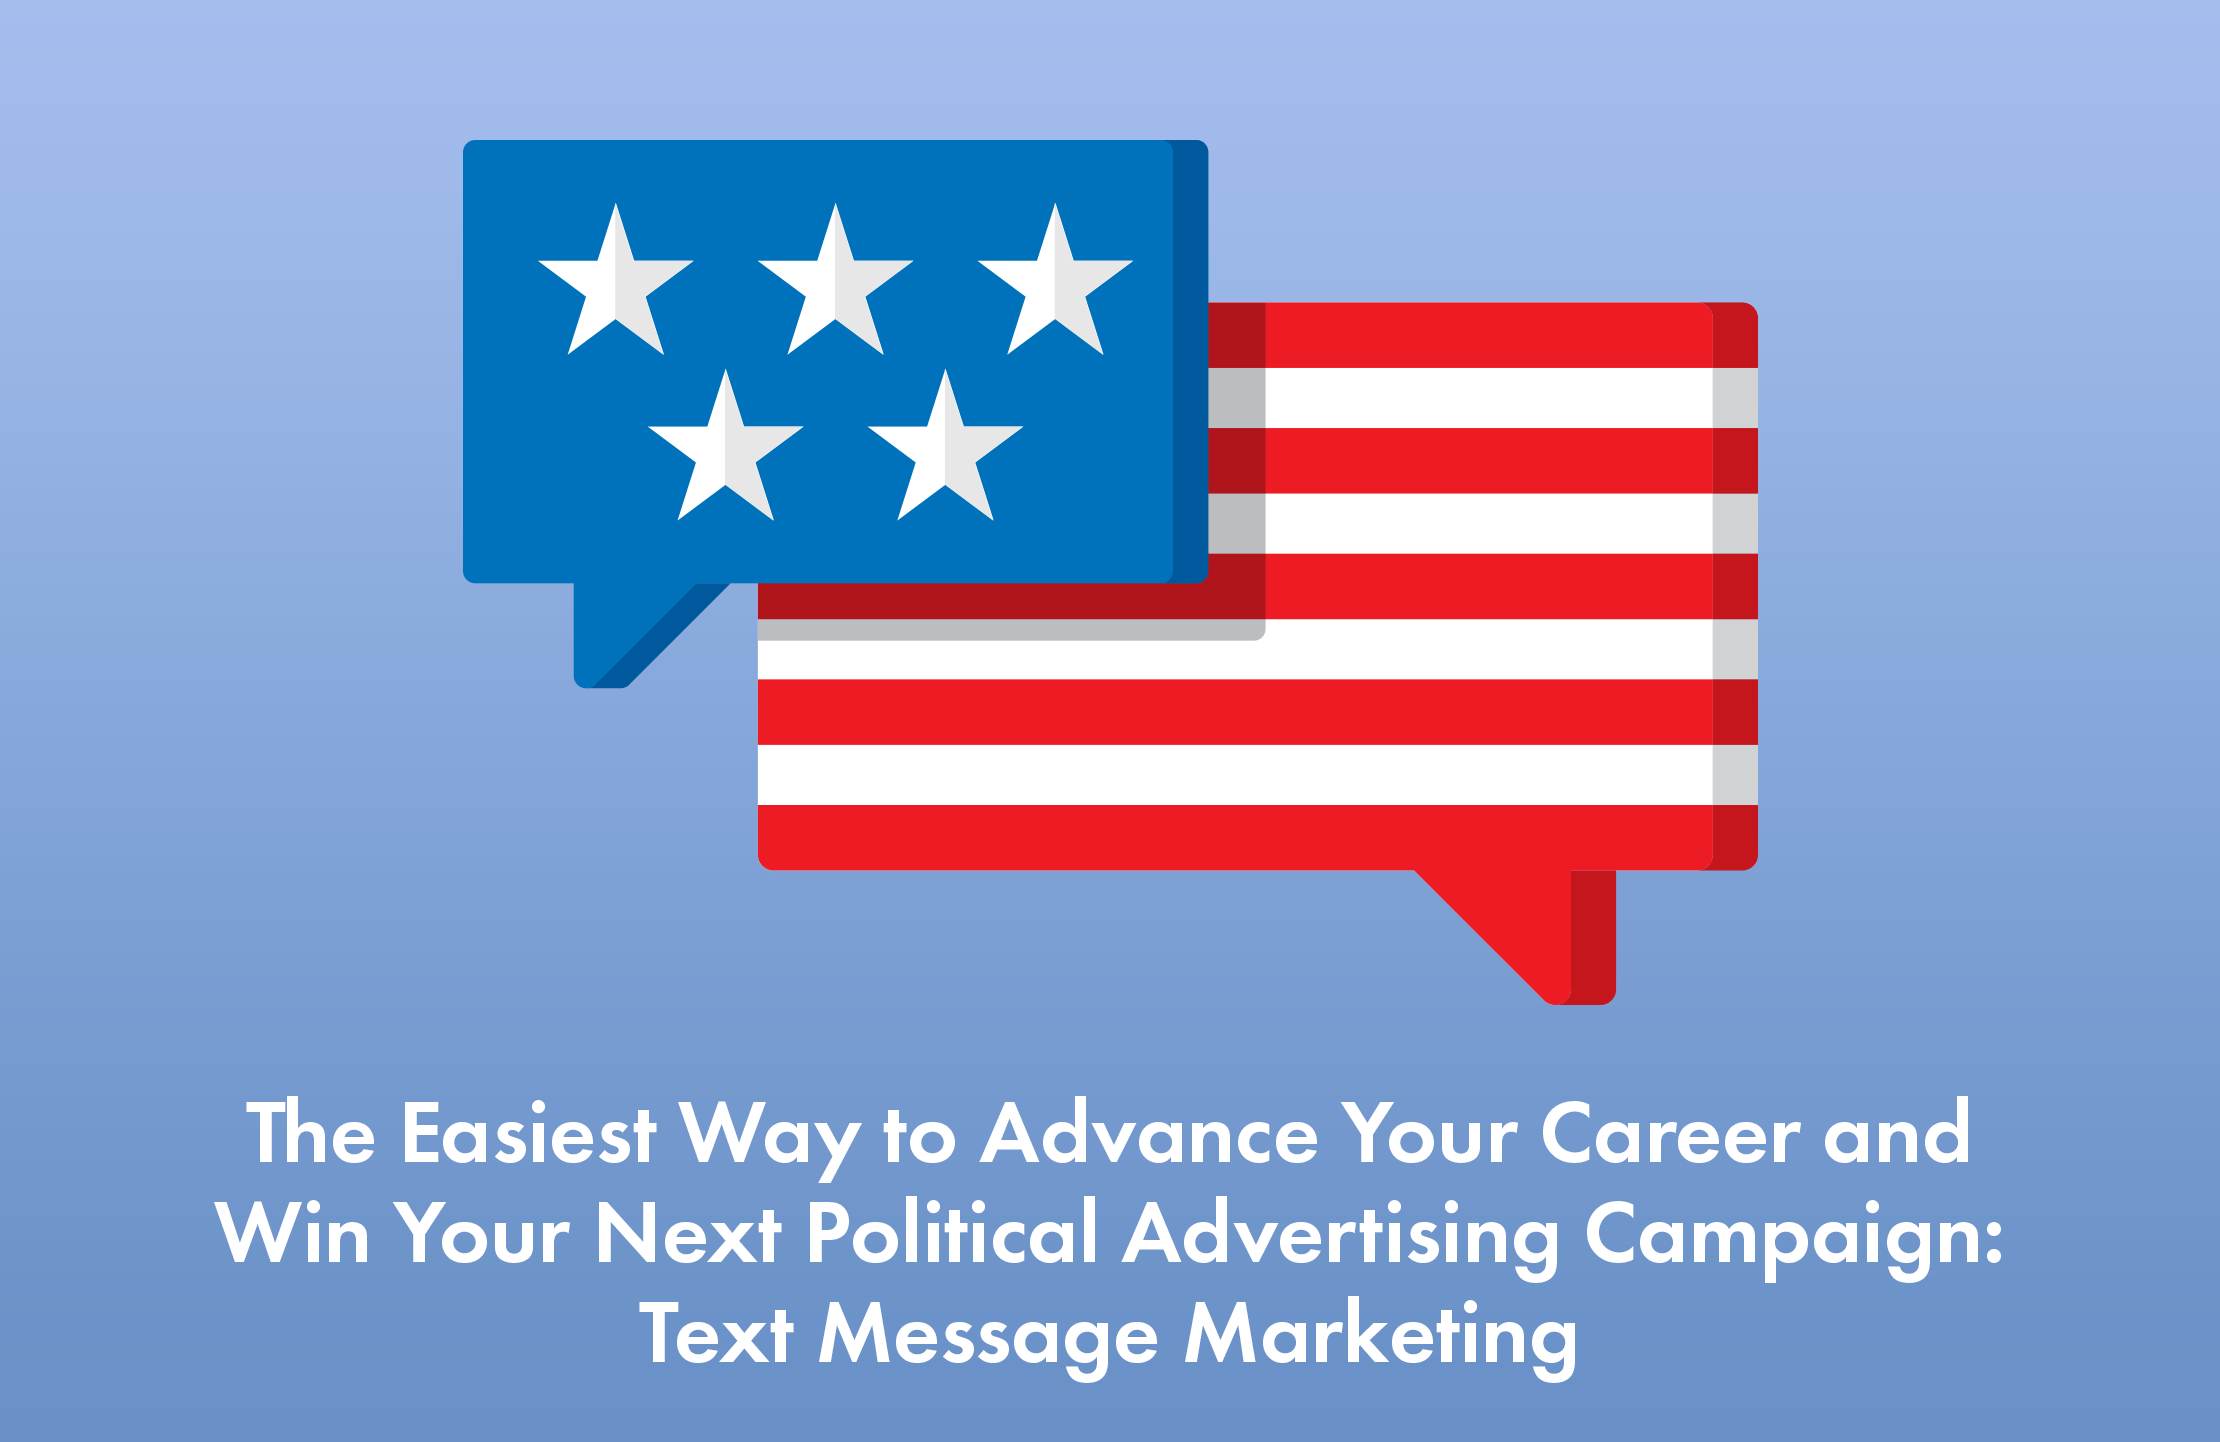 Advance Your Career and Win Your Next Political Campaign With Text Message Marketing